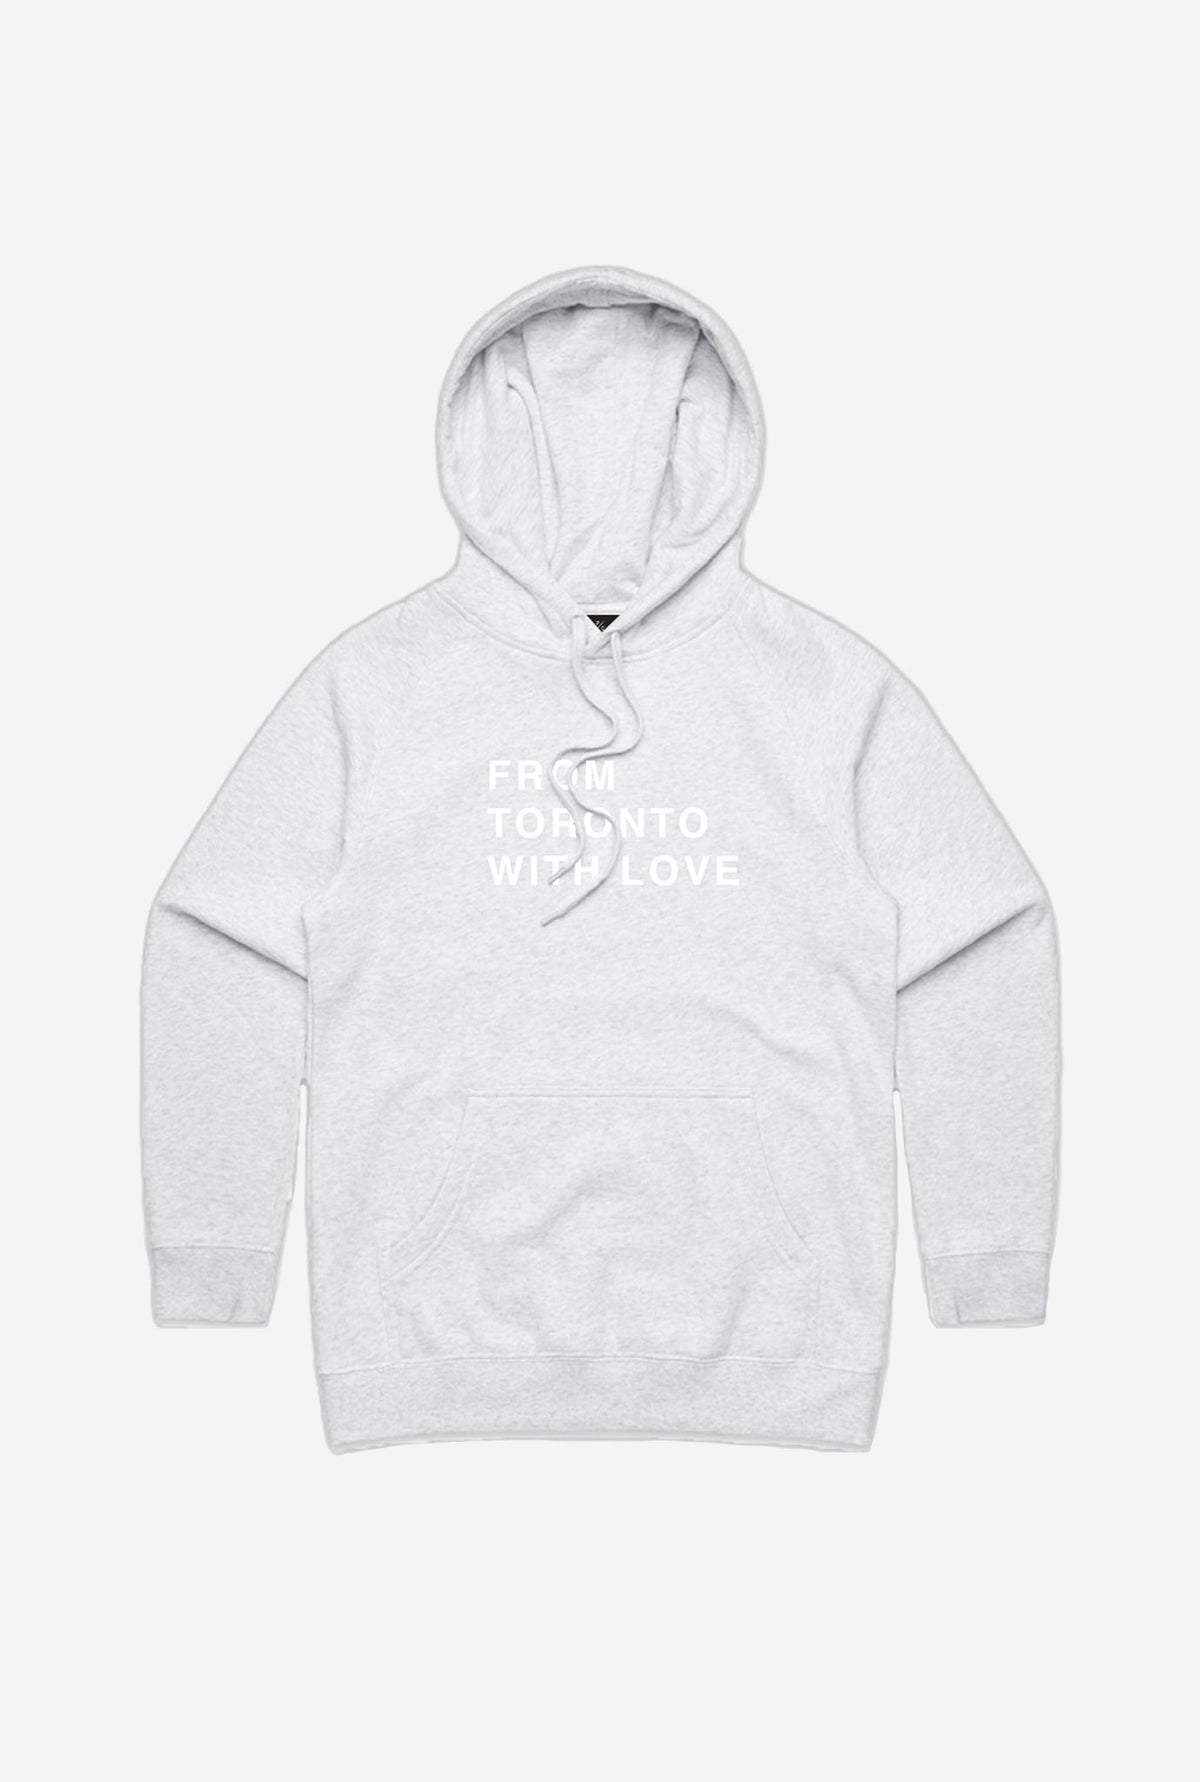 From Toronto With Love Hoodie - Grey